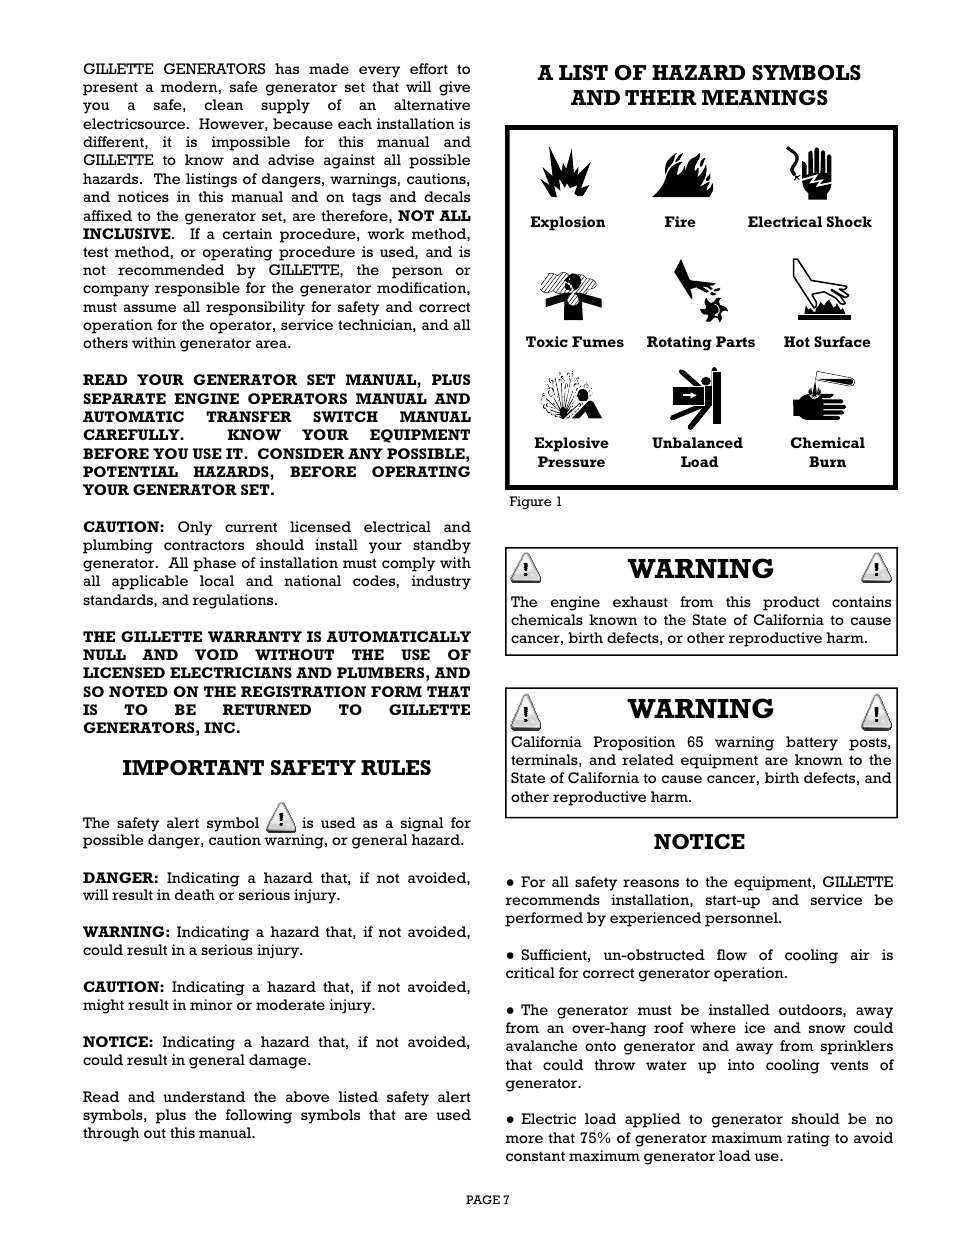 Warning, Important safety rules, A list of hazard symbols and their meanings | Notice | Gillette Generators SPMD-2500 THRU SPMD-4000 User Manual | Page 7 / 27